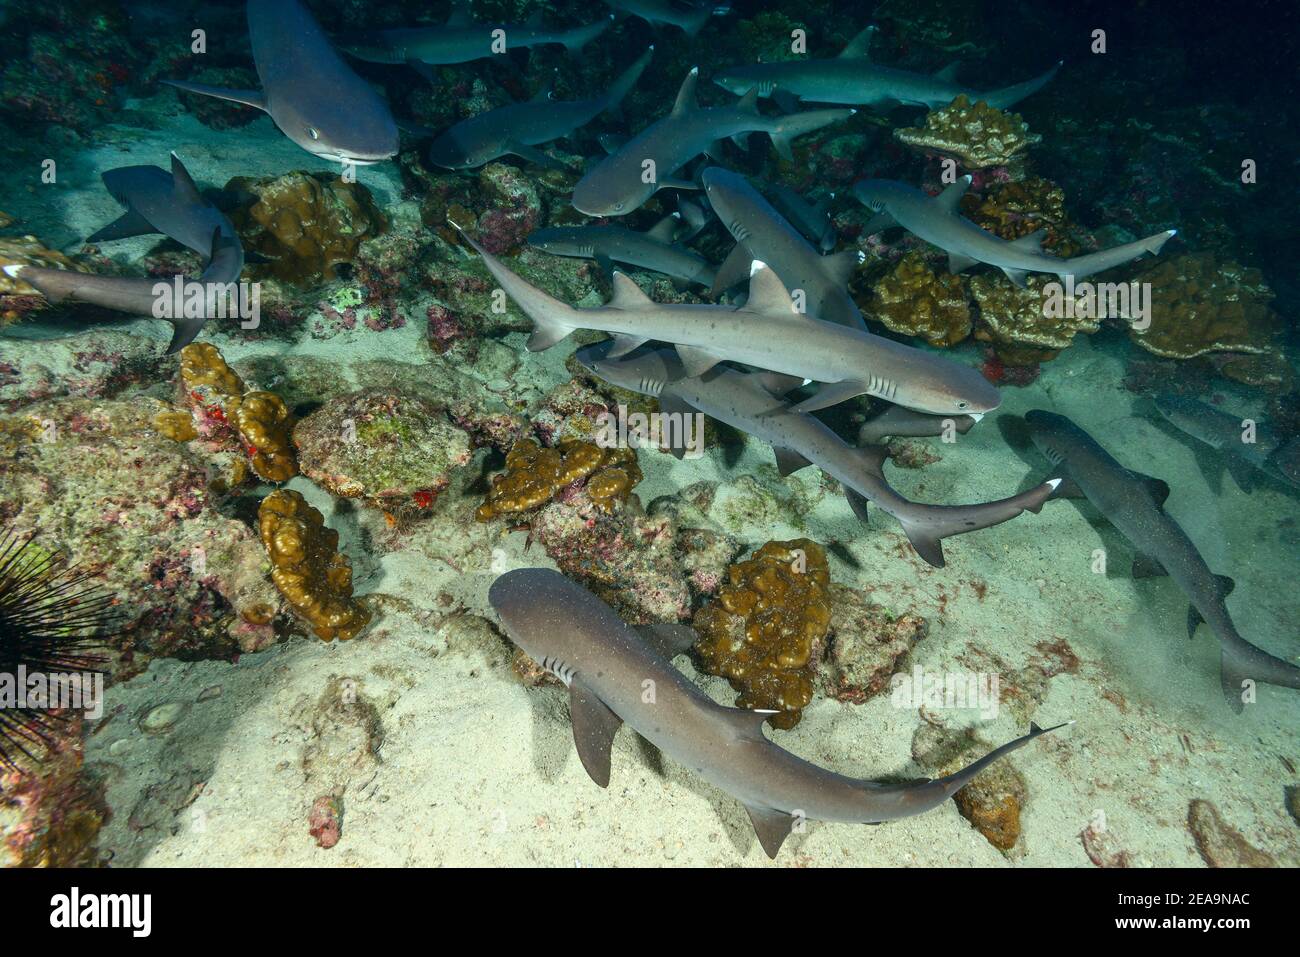 Whitetip reef shark (Triaenodon obesus) sleeping on the seabed, Cocos Island, Costa Rica, Pacific, Pacific Ocean Stock Photo